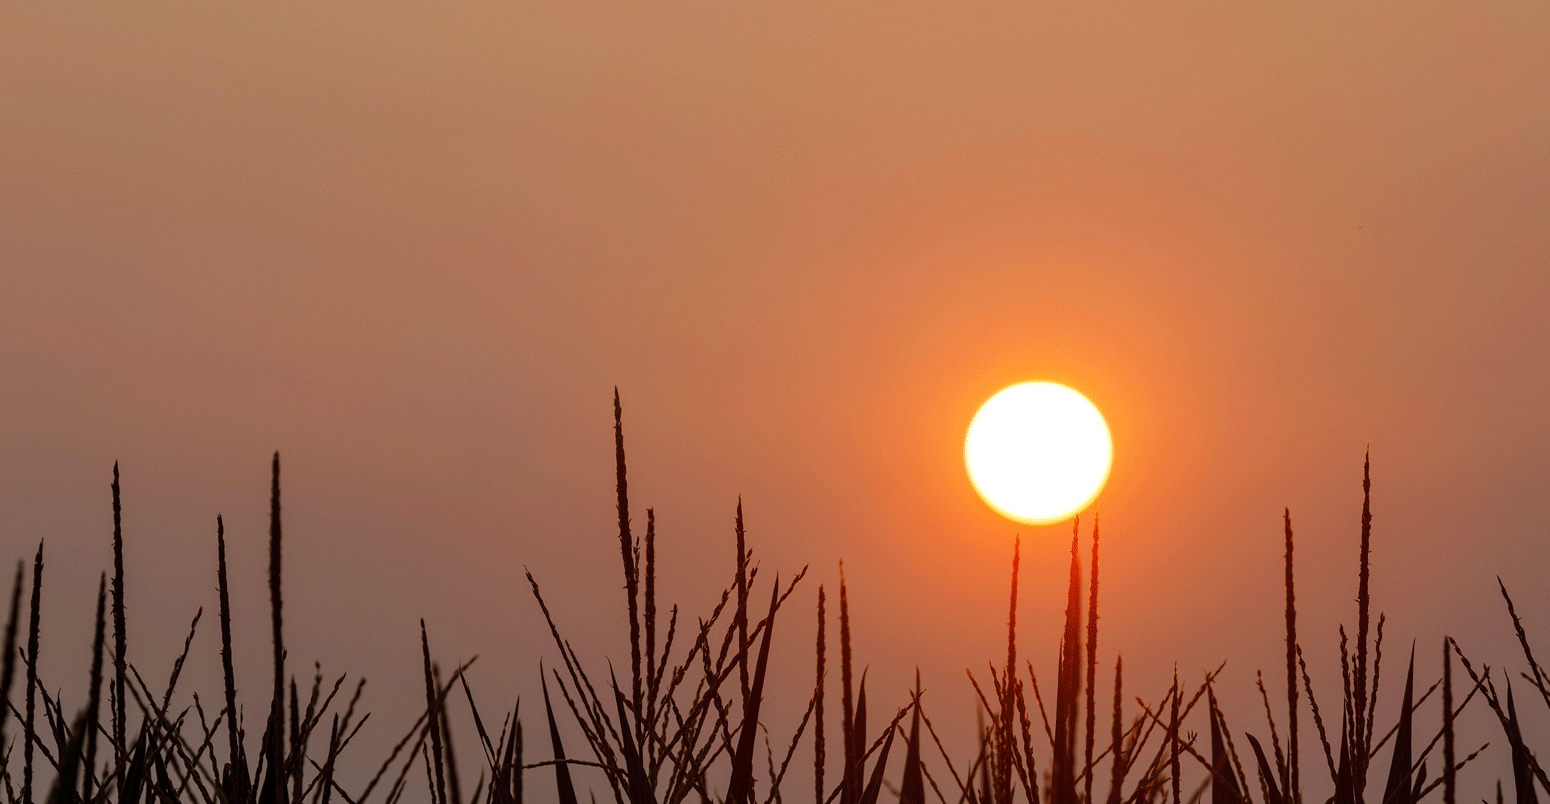 Sunset in Henry County, Iowa, with haze and smoke from forest fires